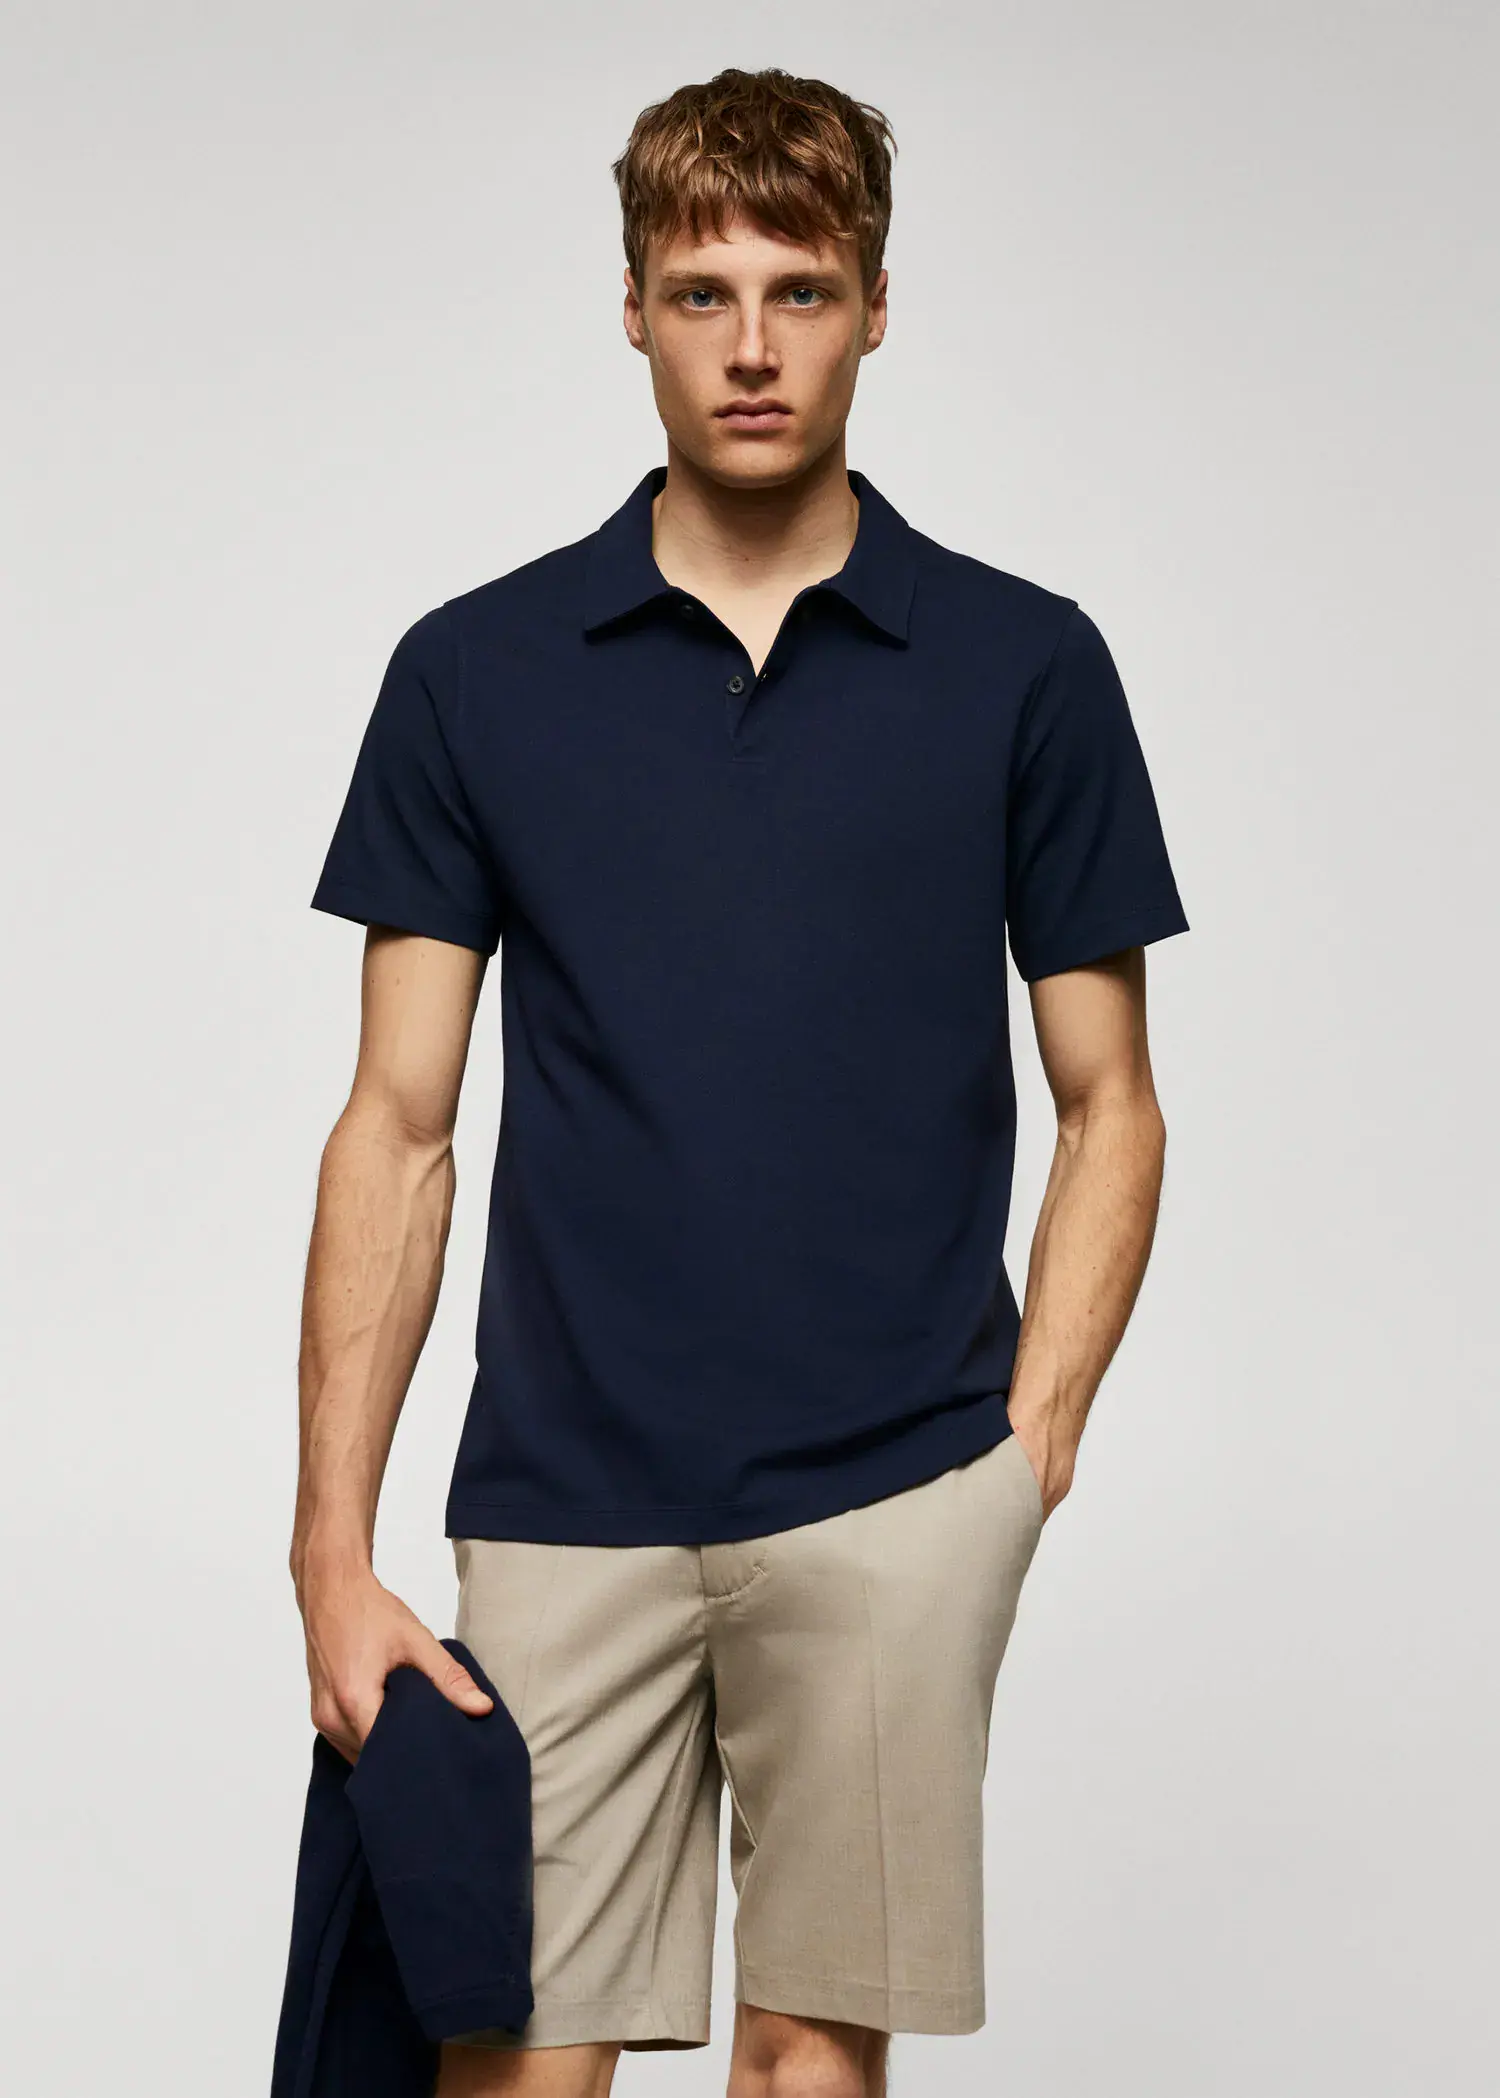 Mango Slim-fit textured cotton polo shirt. a man in a navy blue polo shirt holding a hat. 